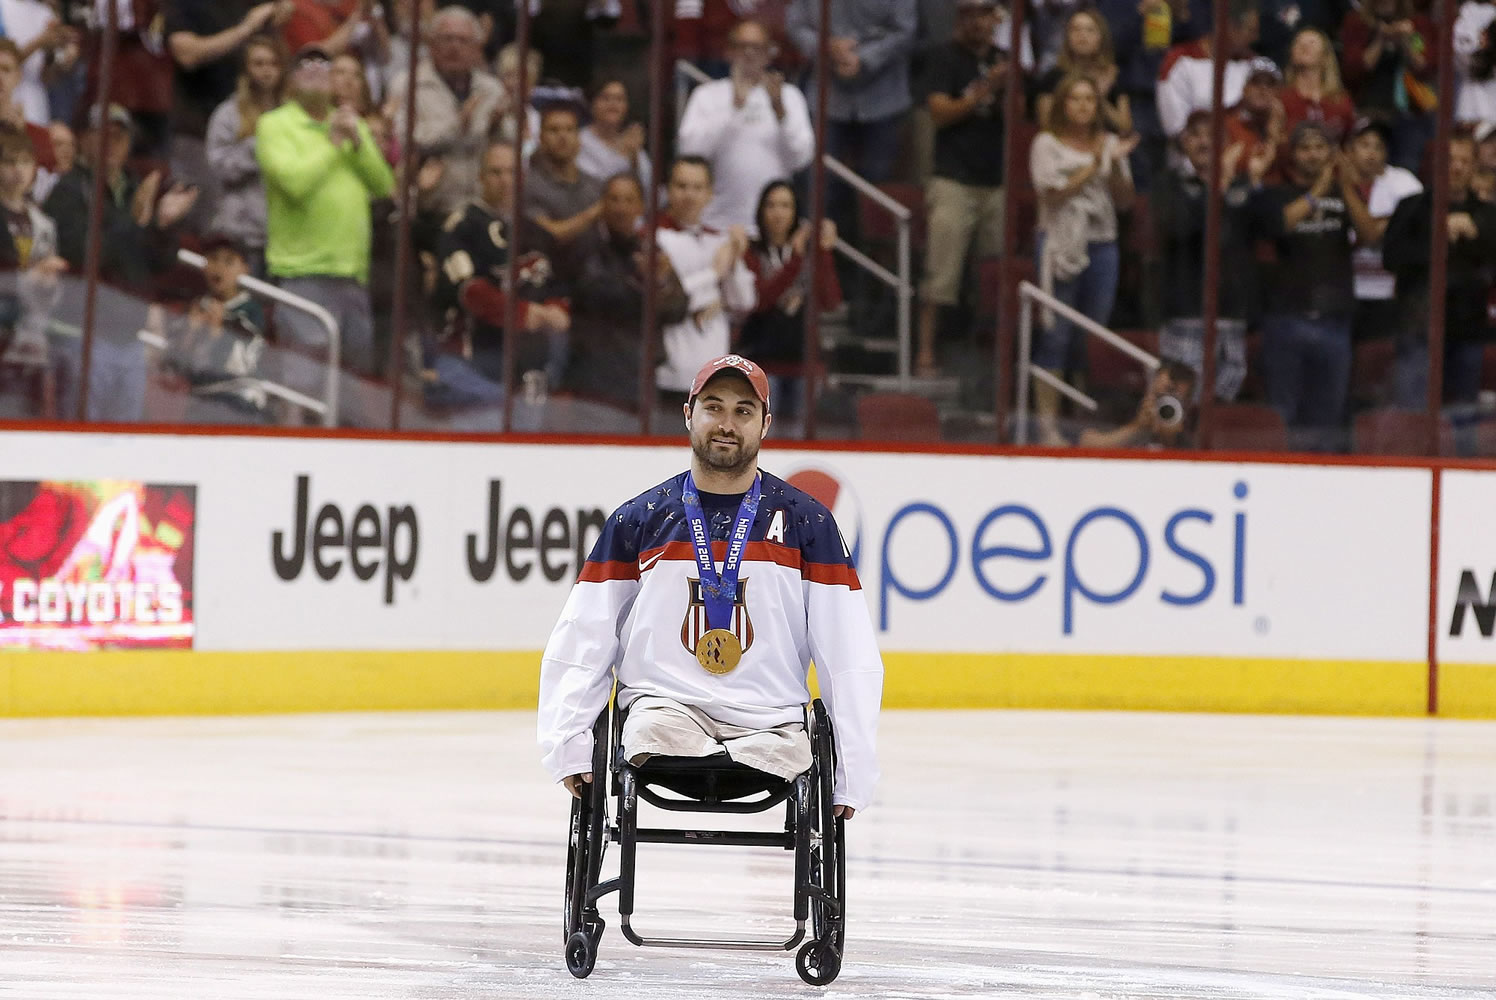 Josh Sweeney, U.S. sled hockey team member for the Paralympic Games, gets a standing ovation from the crowd as he is introduced before an NHL hockey game March 29 in Glendale, Ariz.